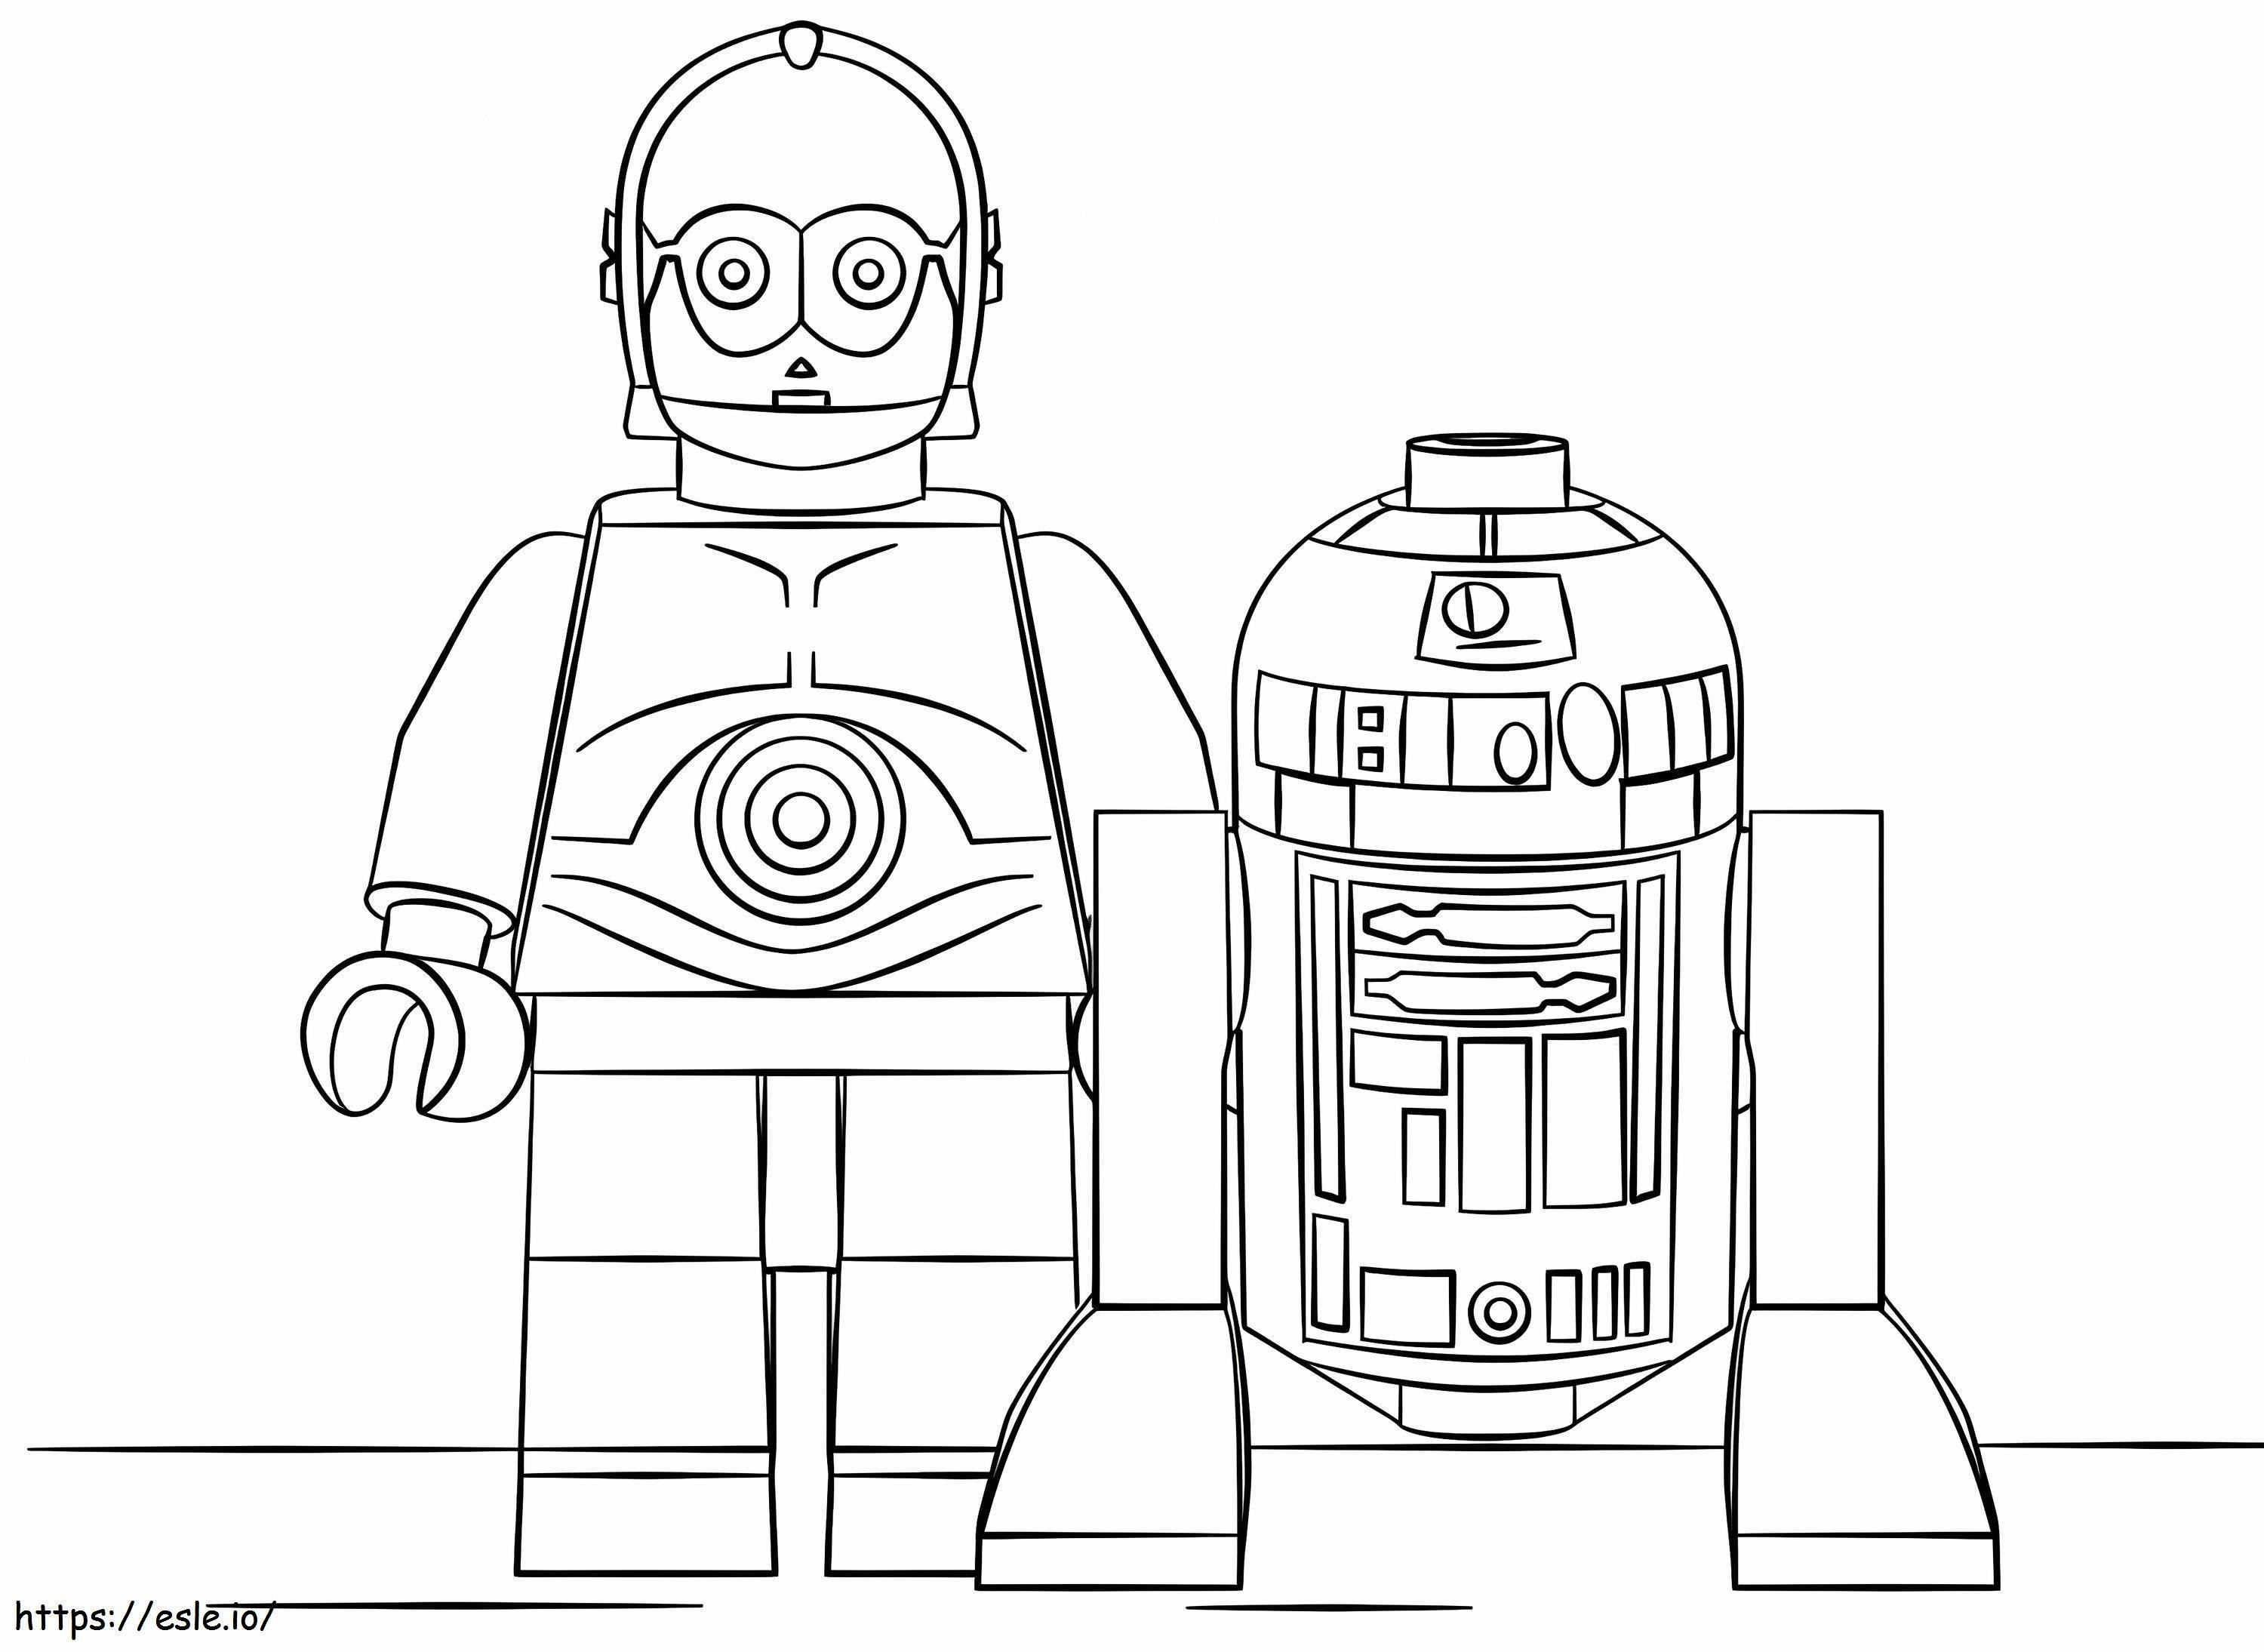 Lego Star Wars R2D2 And C3PO coloring page